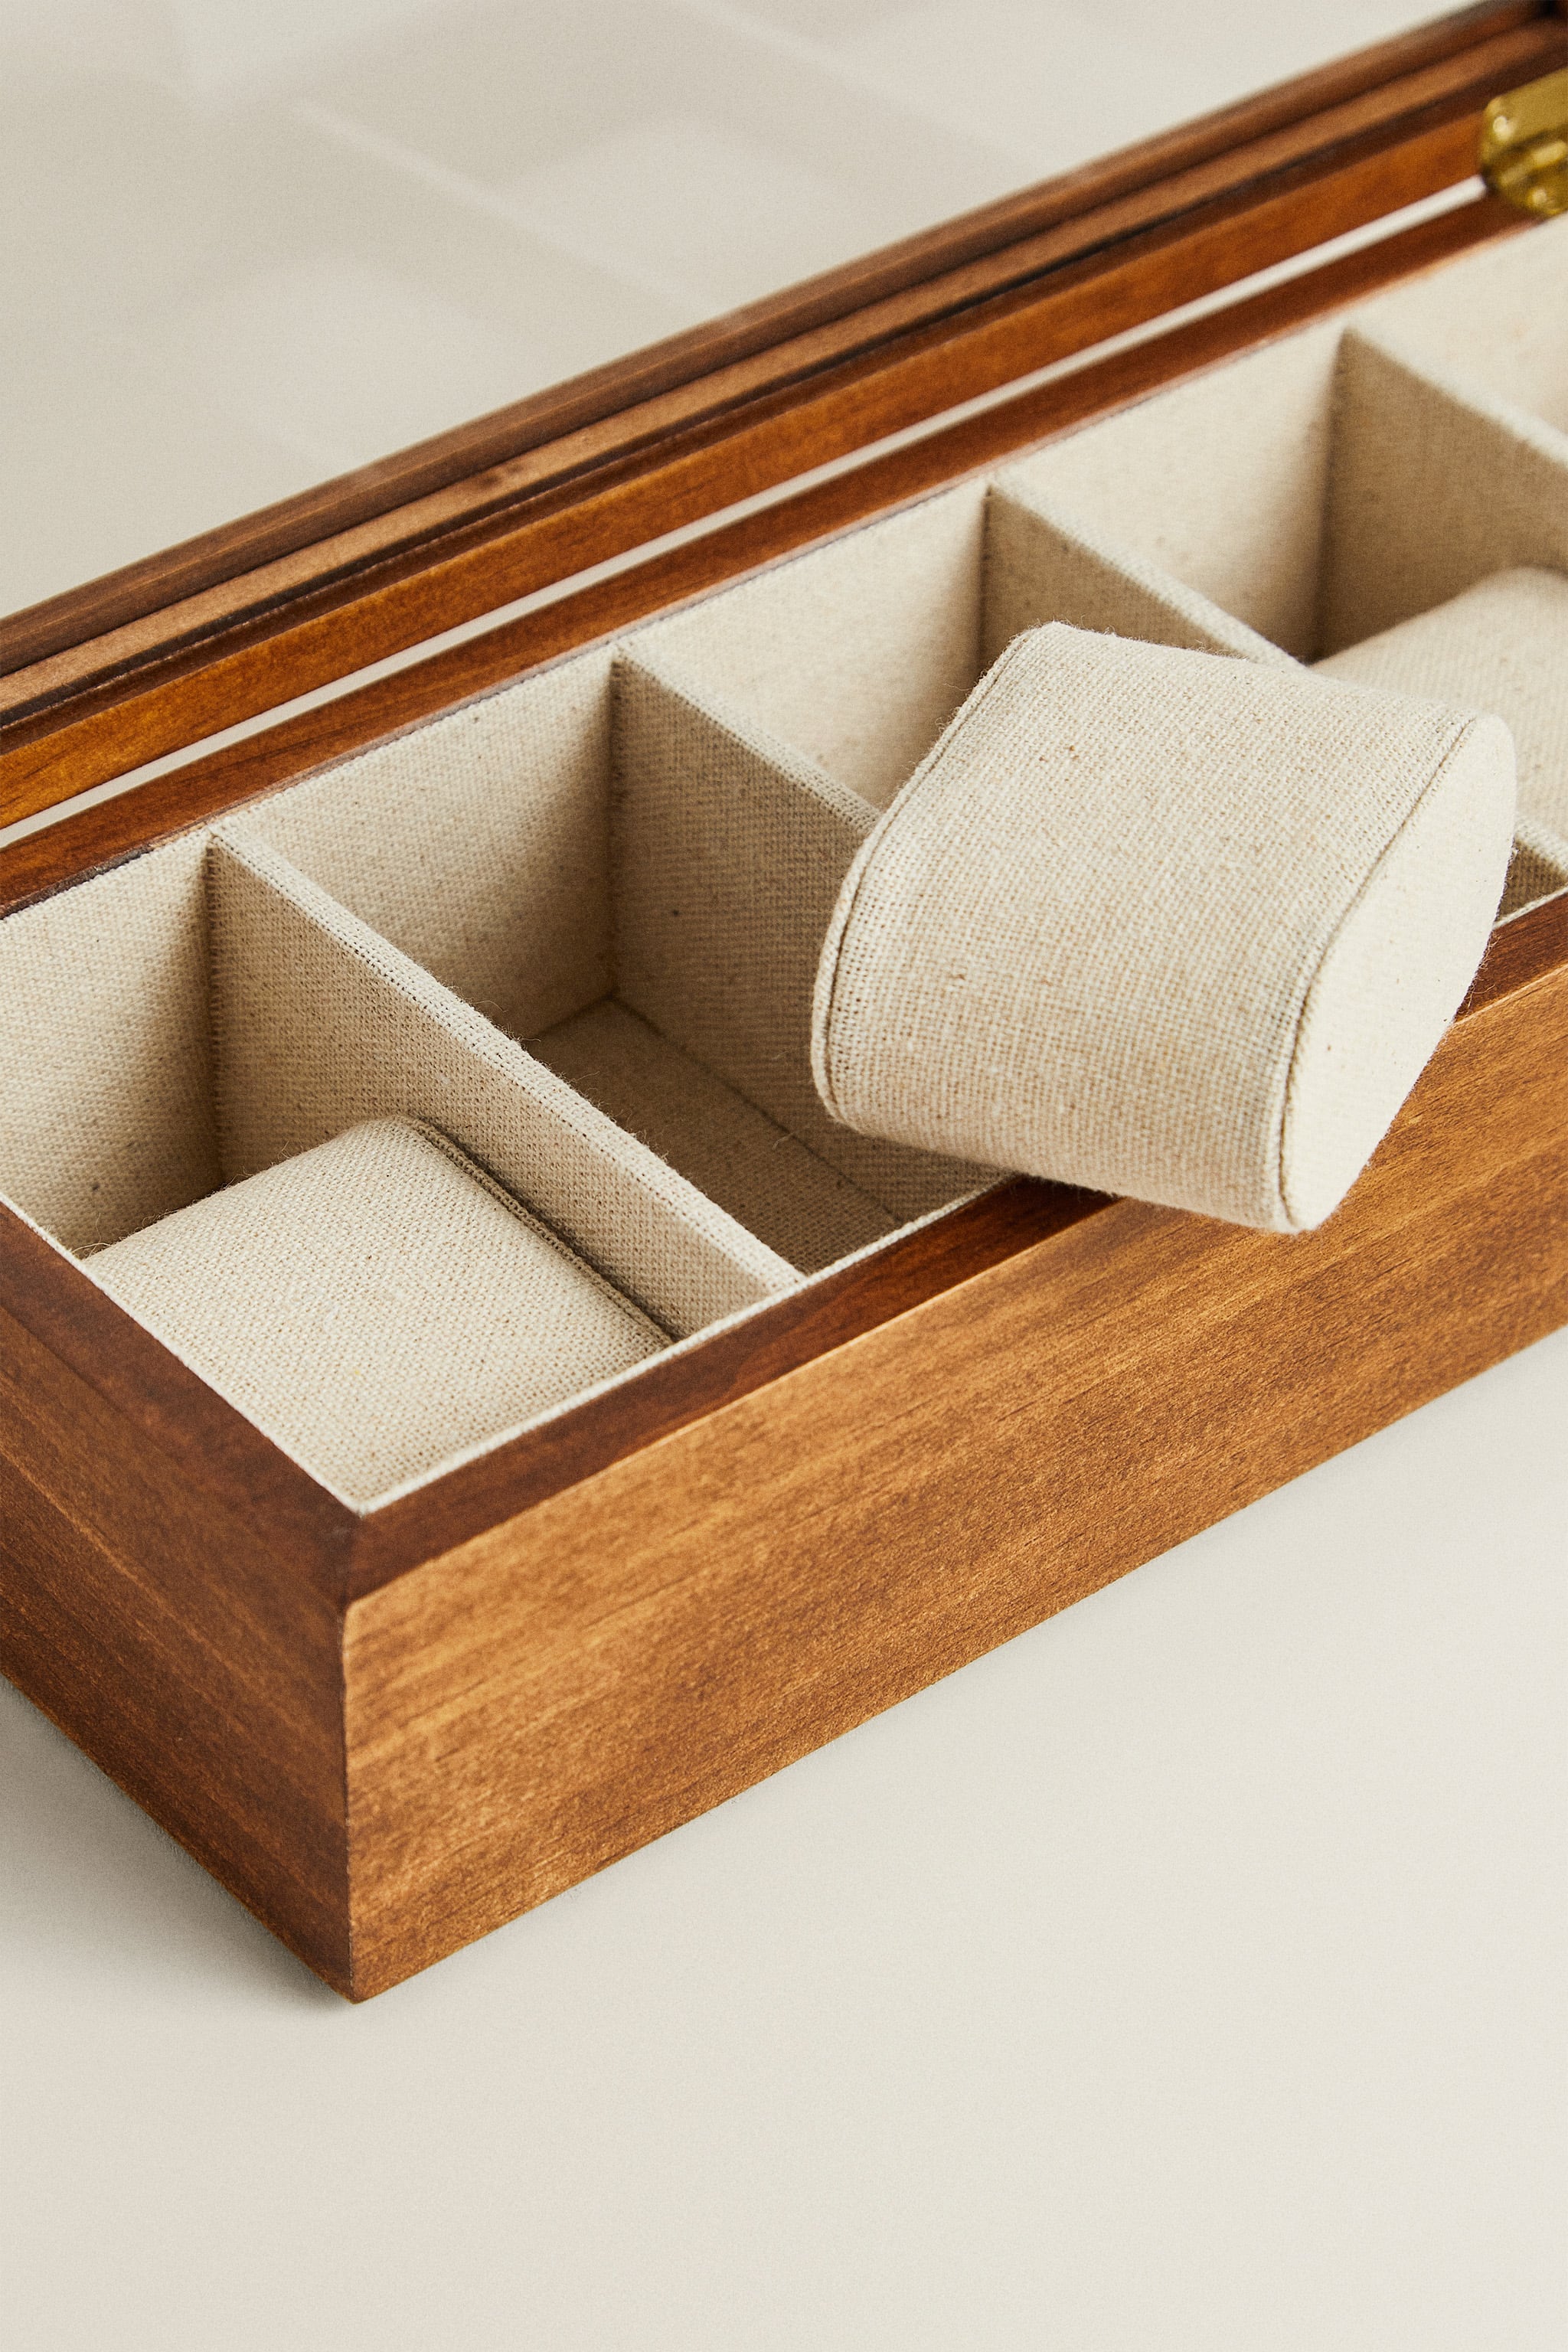 WOODEN AND LINEN WATCH BOX